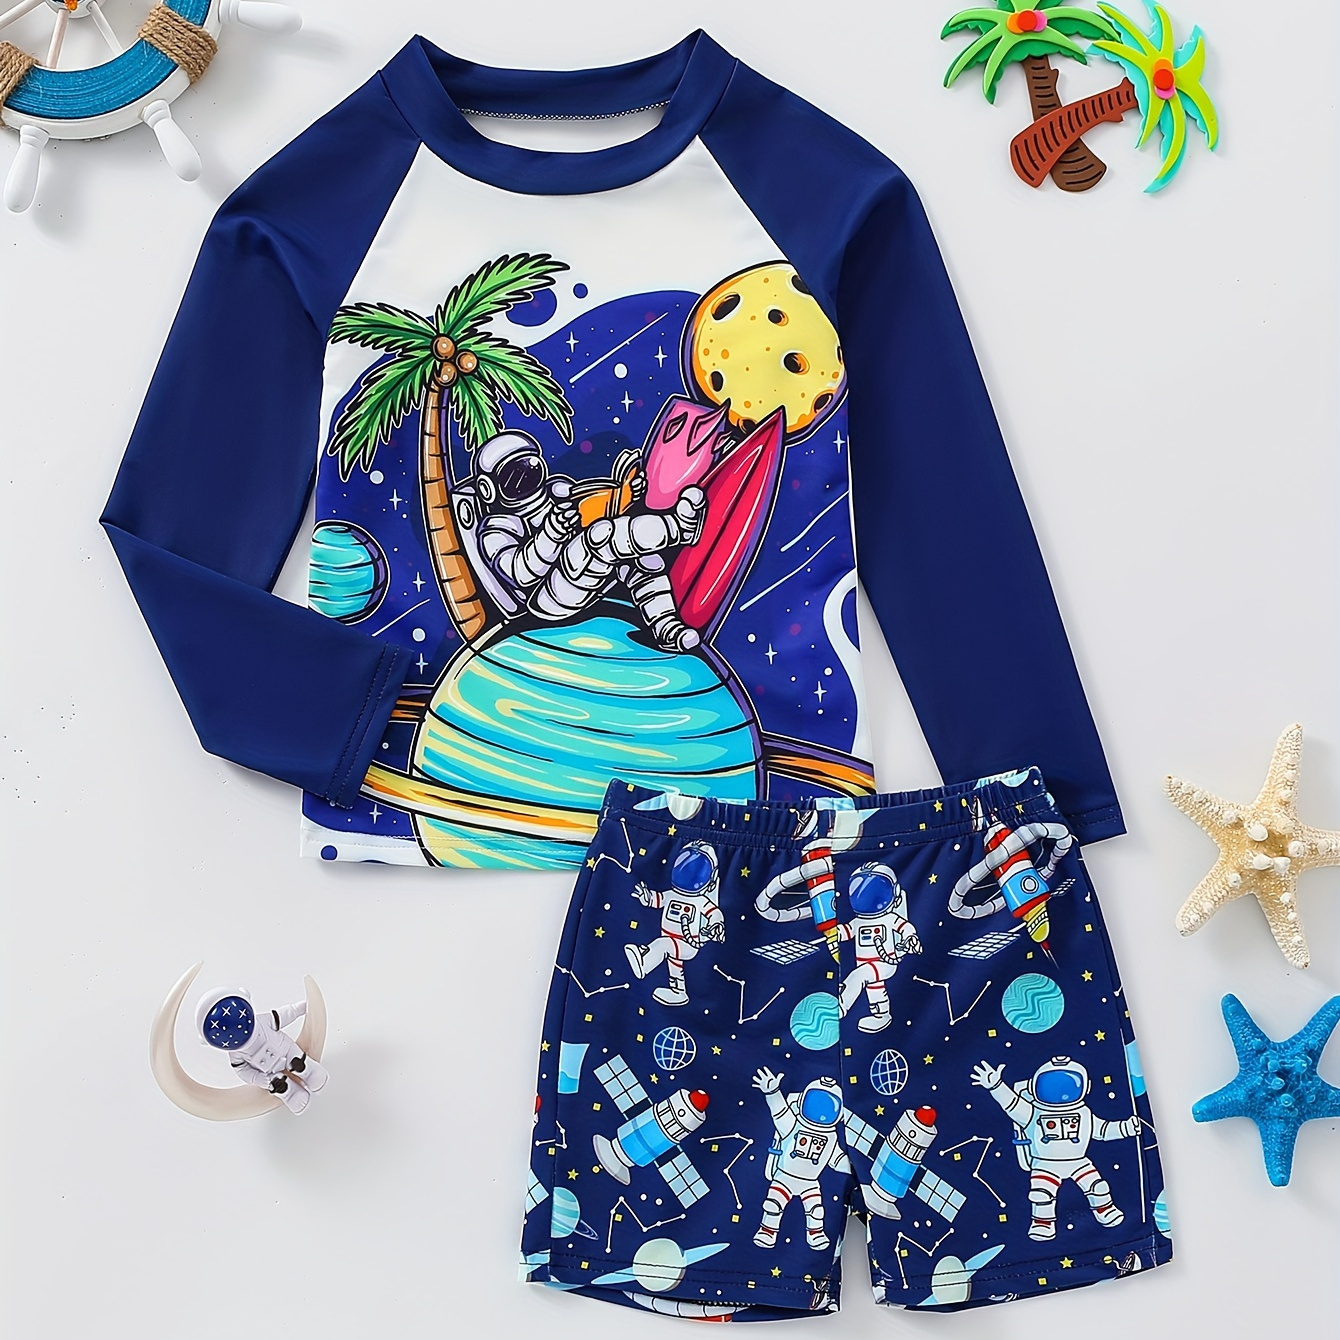 

2pcs Cartoon Space Astronaut Pattern Swimsuit For Boys, T-shirt & Swim Trunks Set, Stretchy Surfing Suit, Boys Swimwear For Summer Beach Vacation